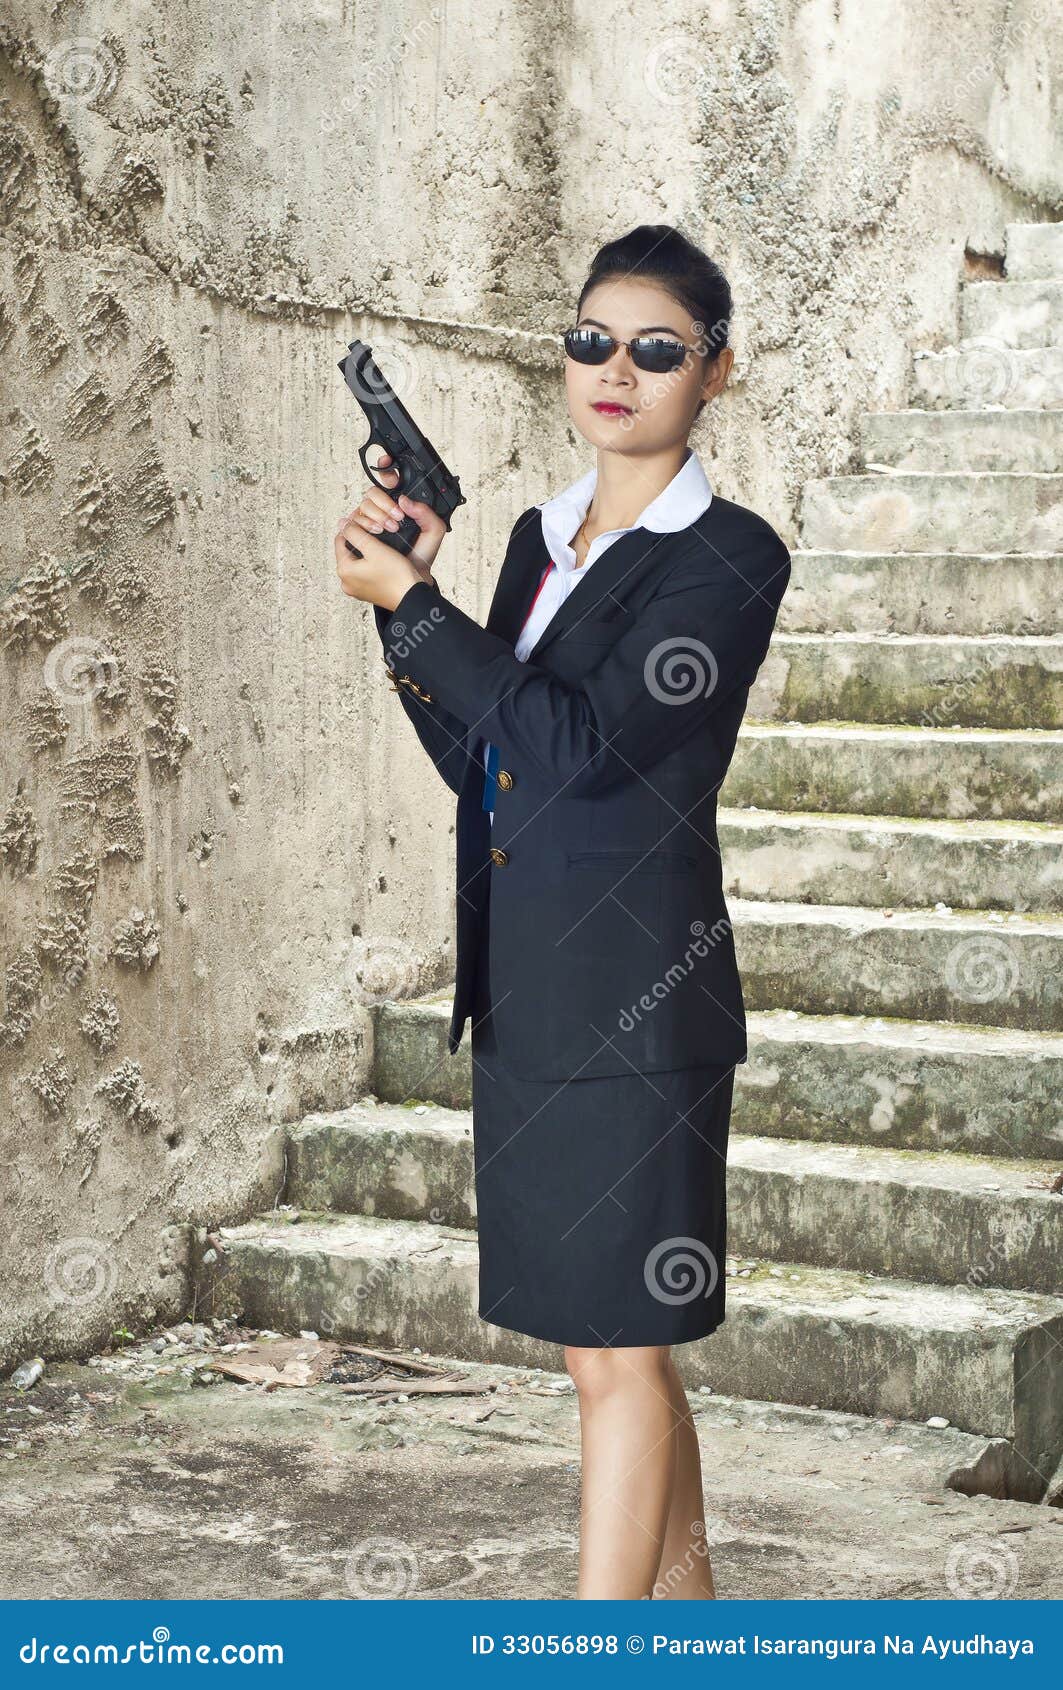 Female Fbi Agent Outfit